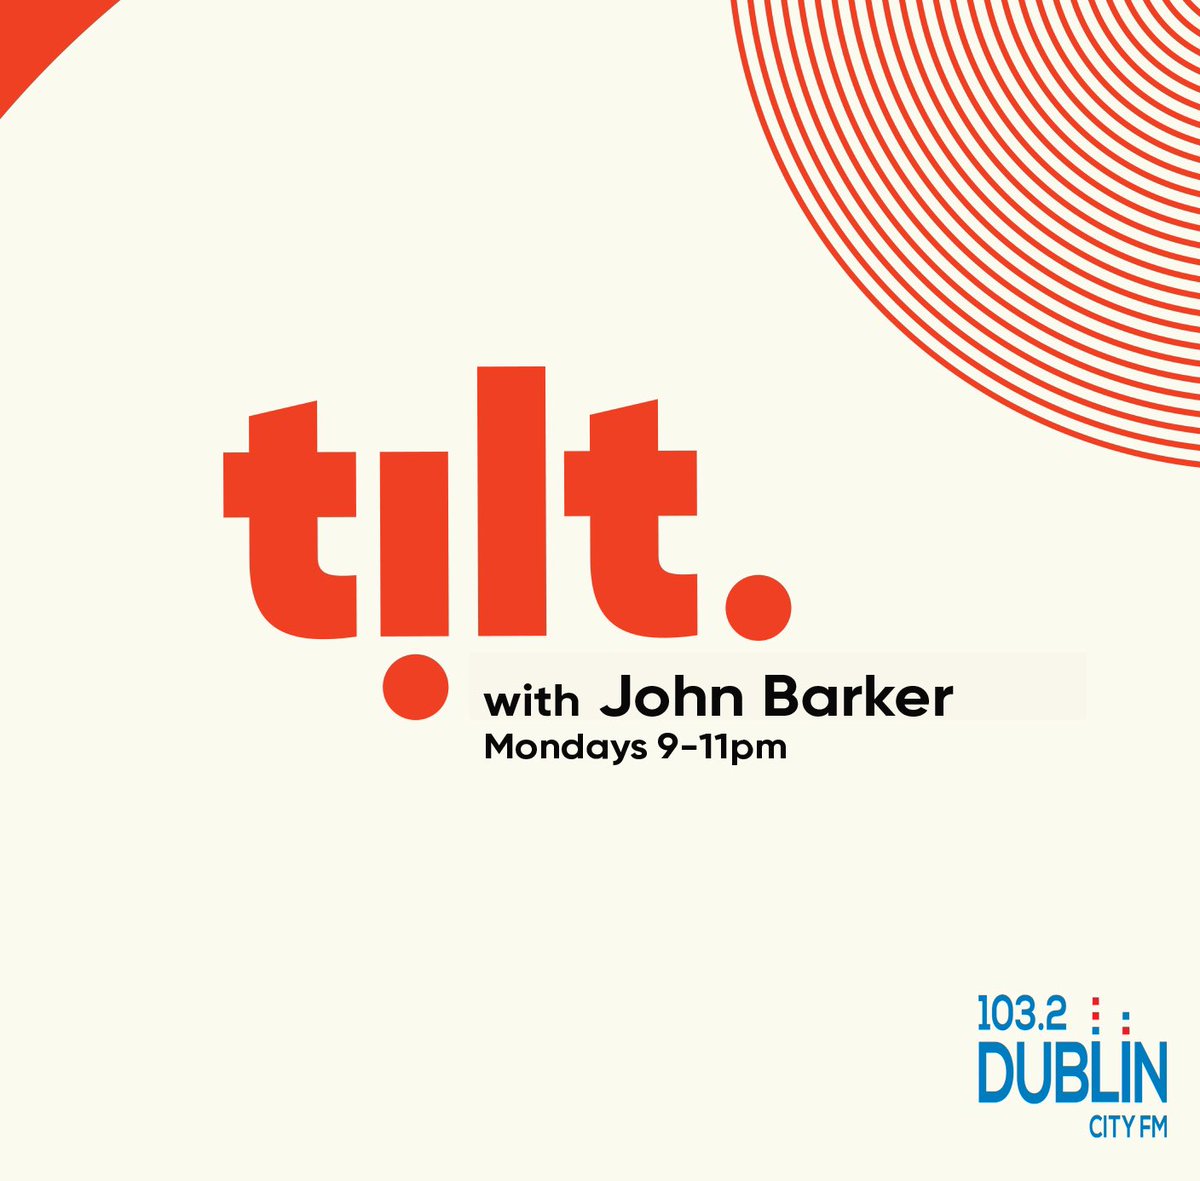 New music on tonight’s Tilt is brought to you by: @fontainesdublin @thumper666 @oddnumbersmusic @thescratchmusic @daireheffernan @weareelephants_ @Lydiafordmusic @SCATTEREDASHES1 @TungInCheekBand @SkullThePierre @conor_mason @sourfruitmusic Tune in to @dublincityfm from 9pm